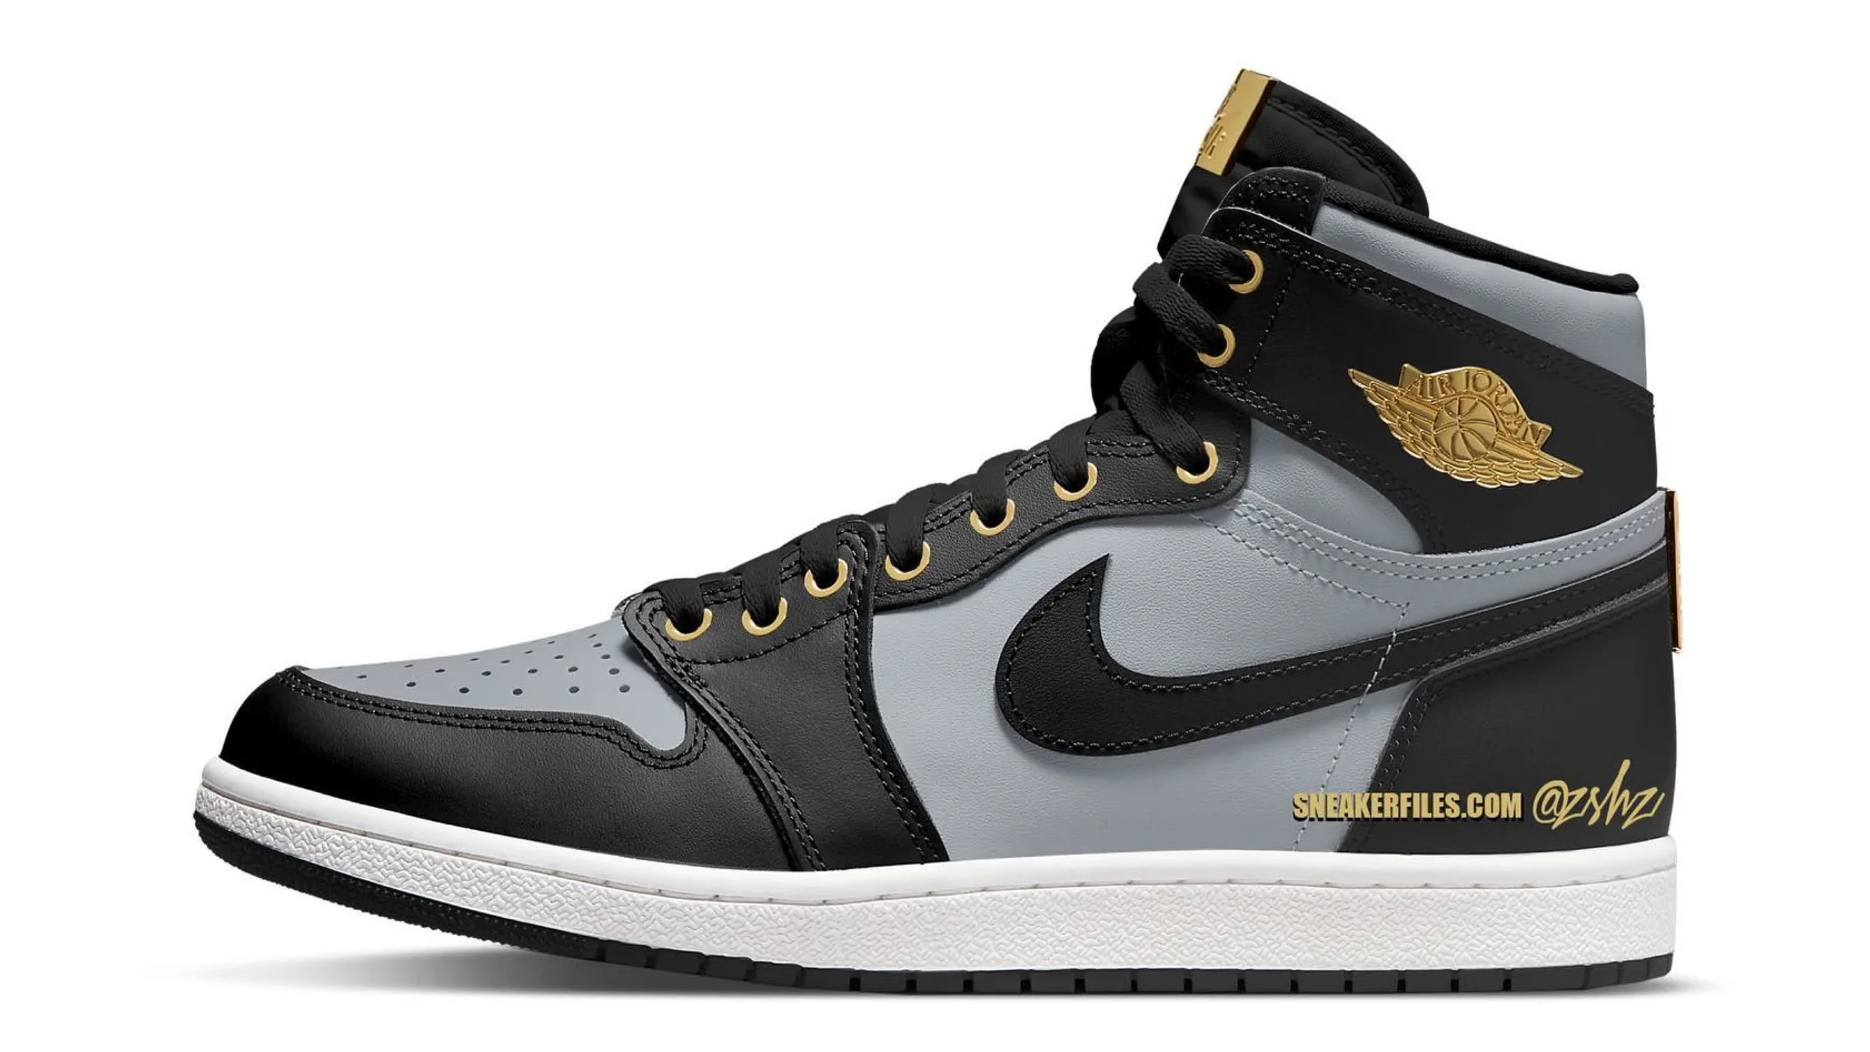 These Upcoming Air Jordan 1s Will Reportedly Cost $1,500